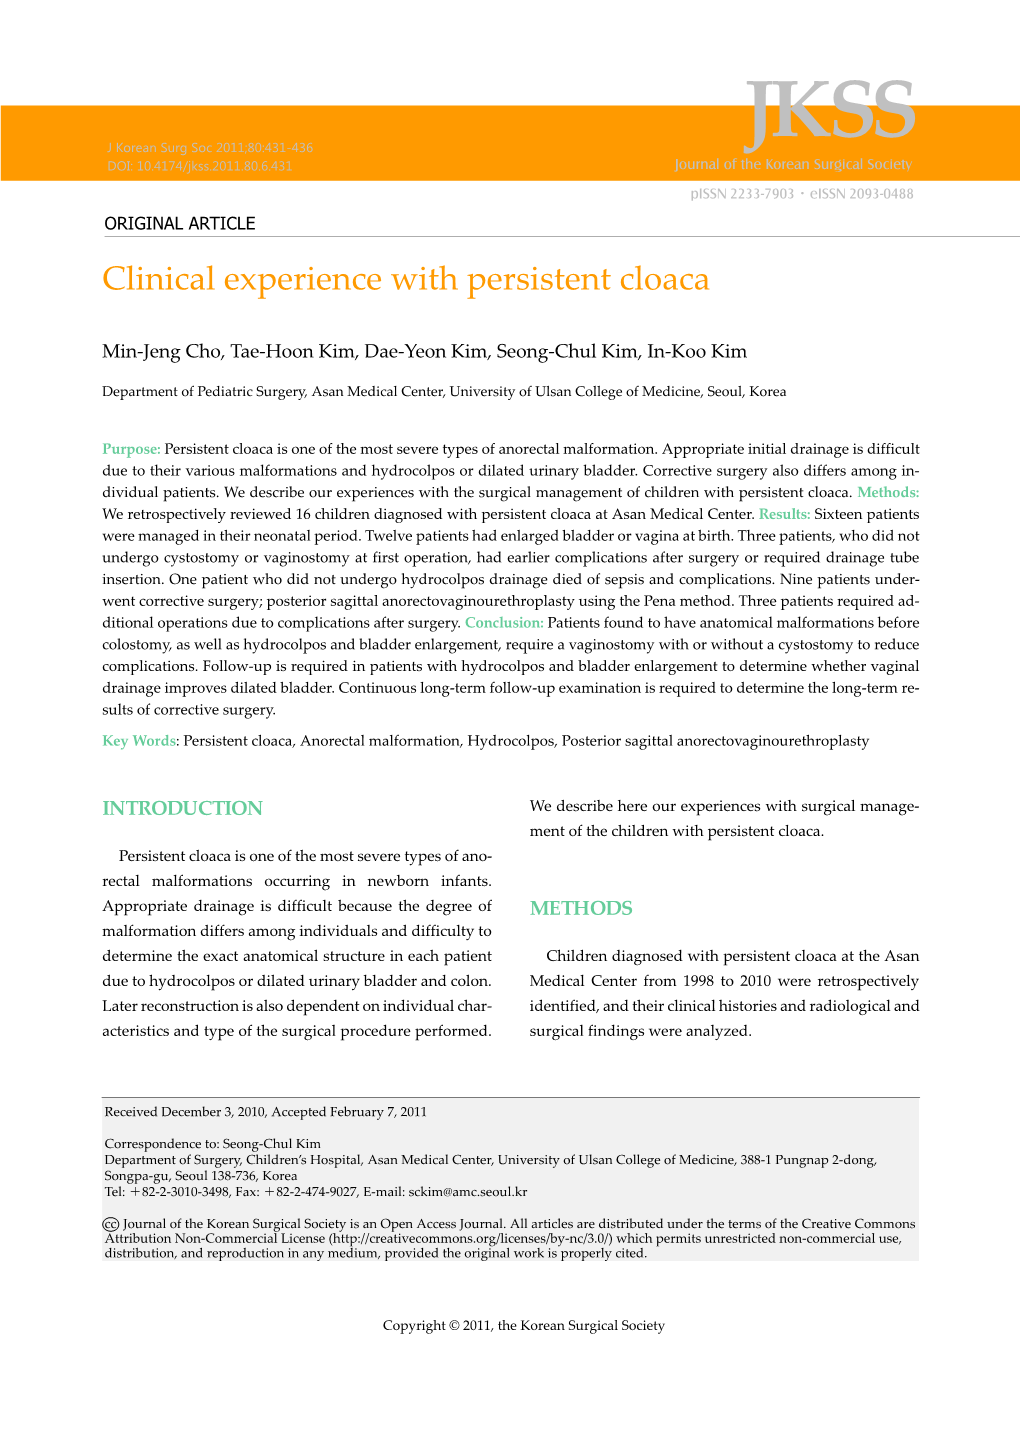 Clinical Experience with Persistent Cloaca